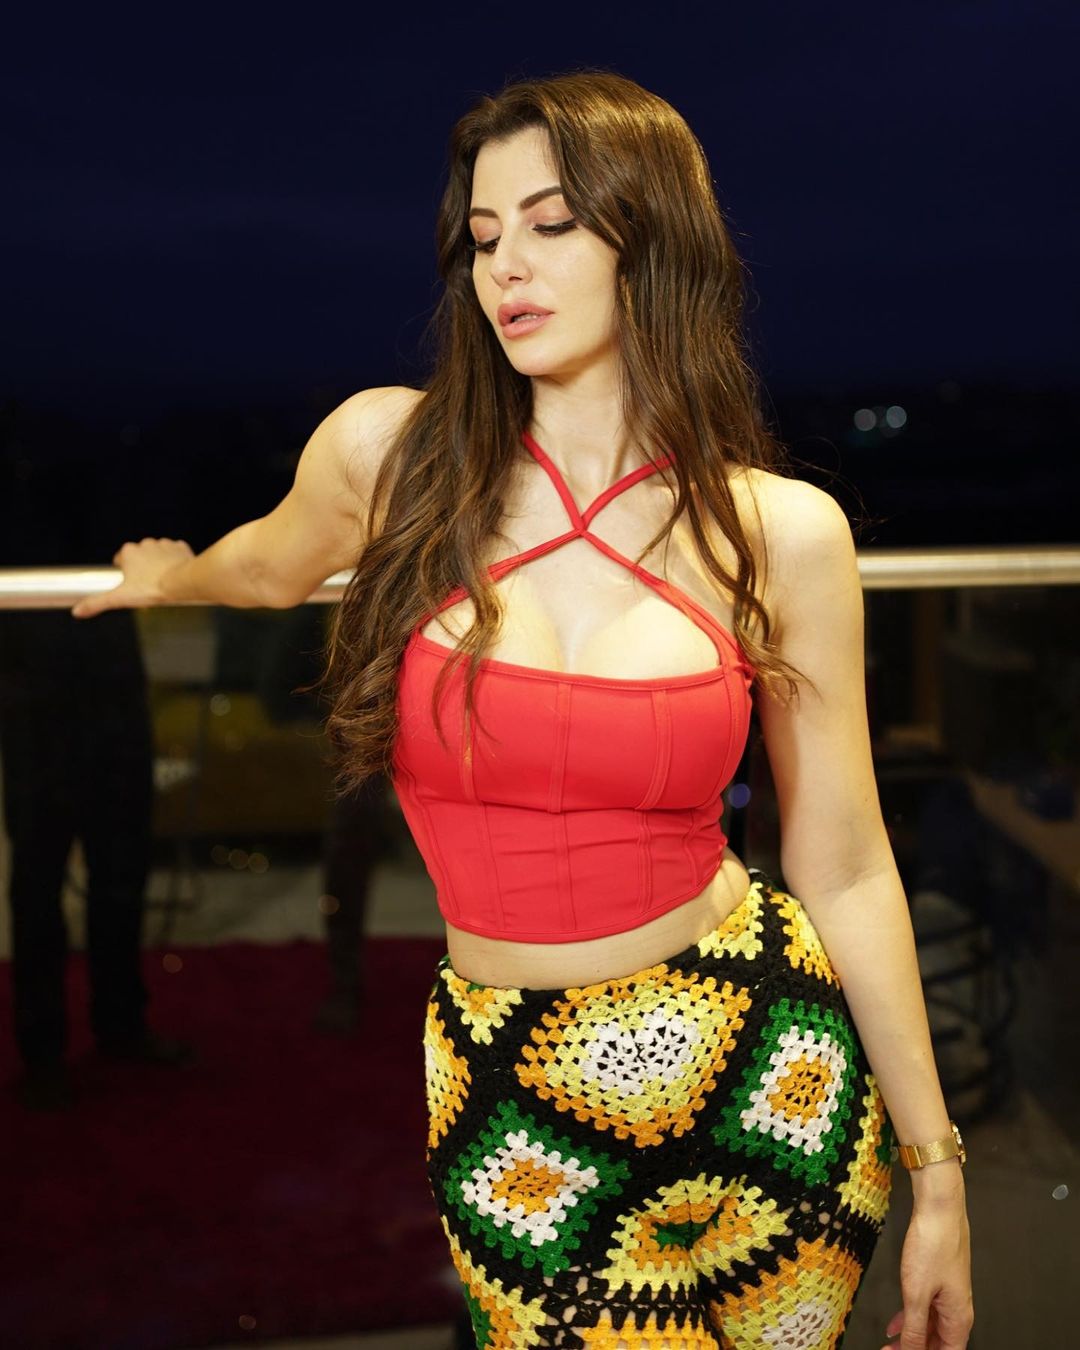 Giorgia Andriani looks sexy in the red top and colourful pants